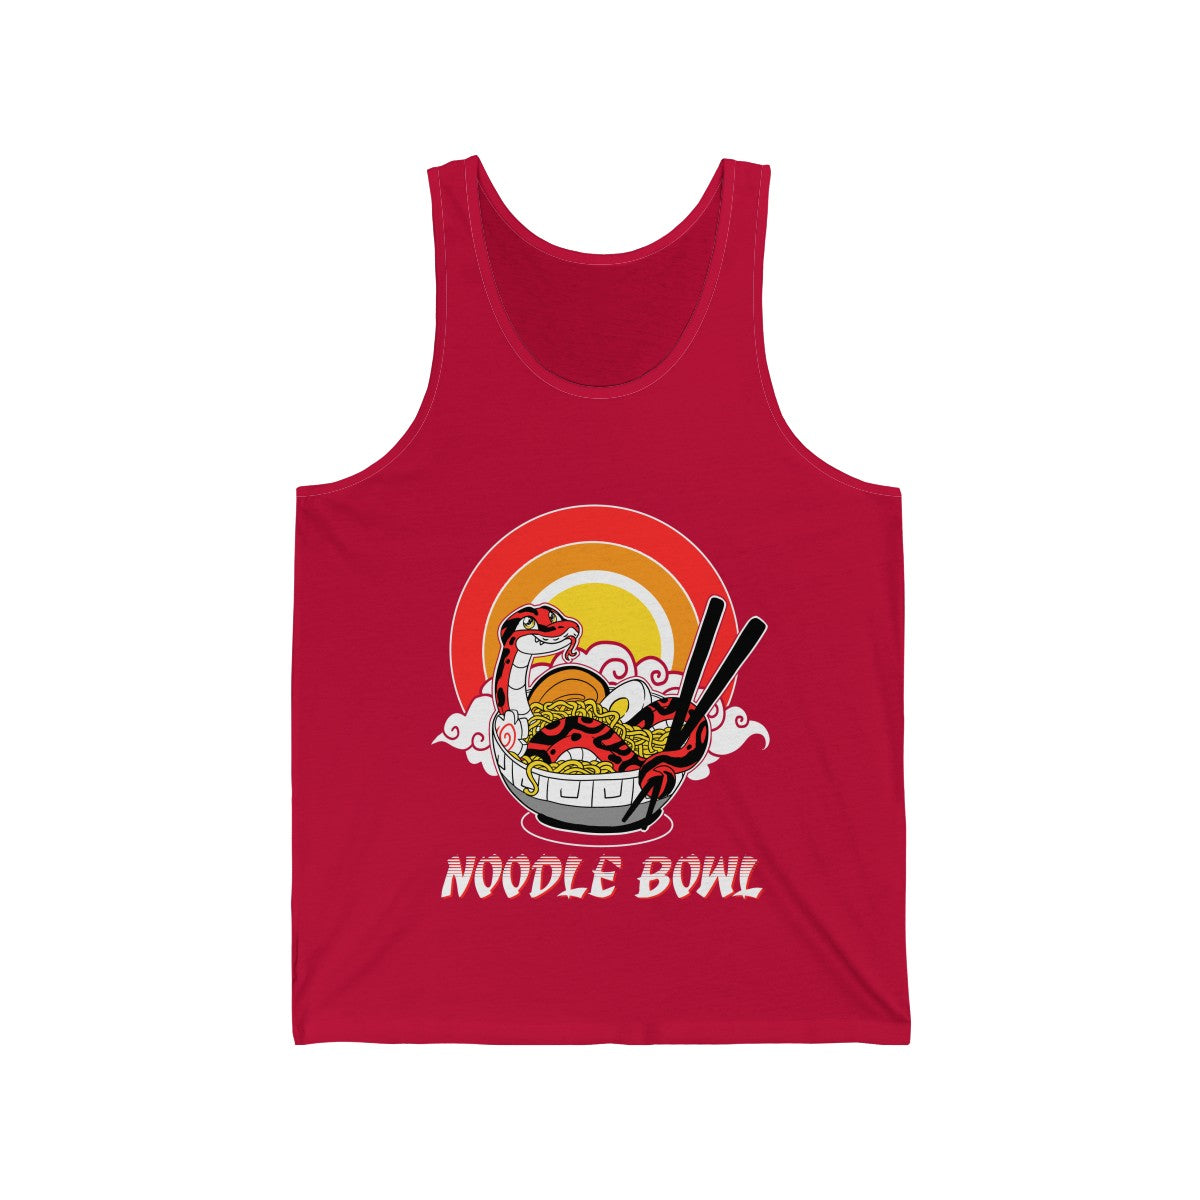 Noodle Bowl - Tank Top Tank Top Crunchy Crowe Red XS 